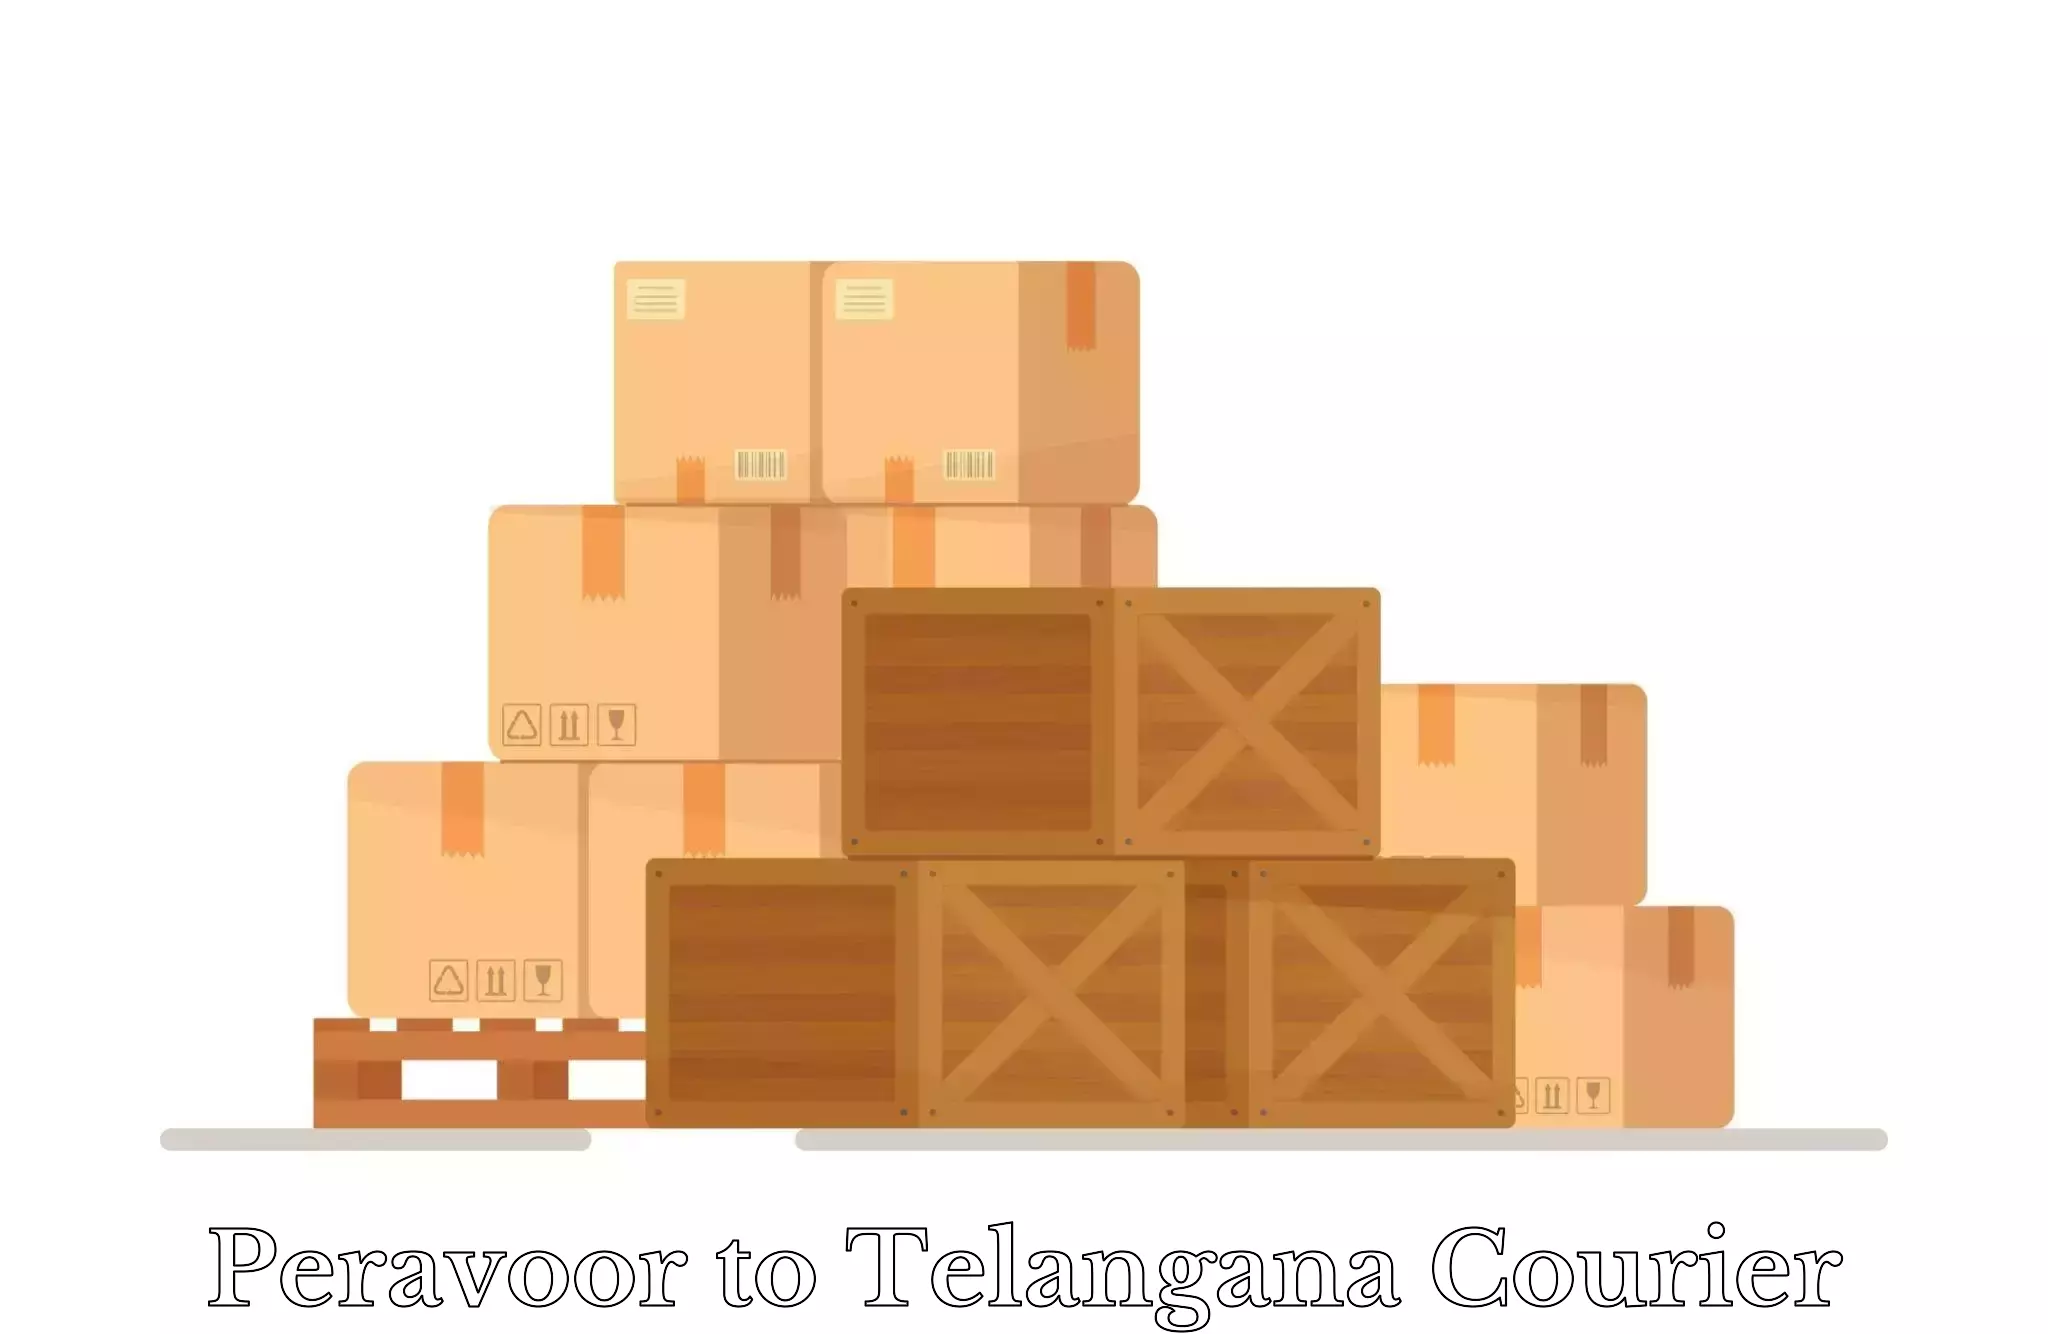 Luggage transport consulting Peravoor to Manneguda